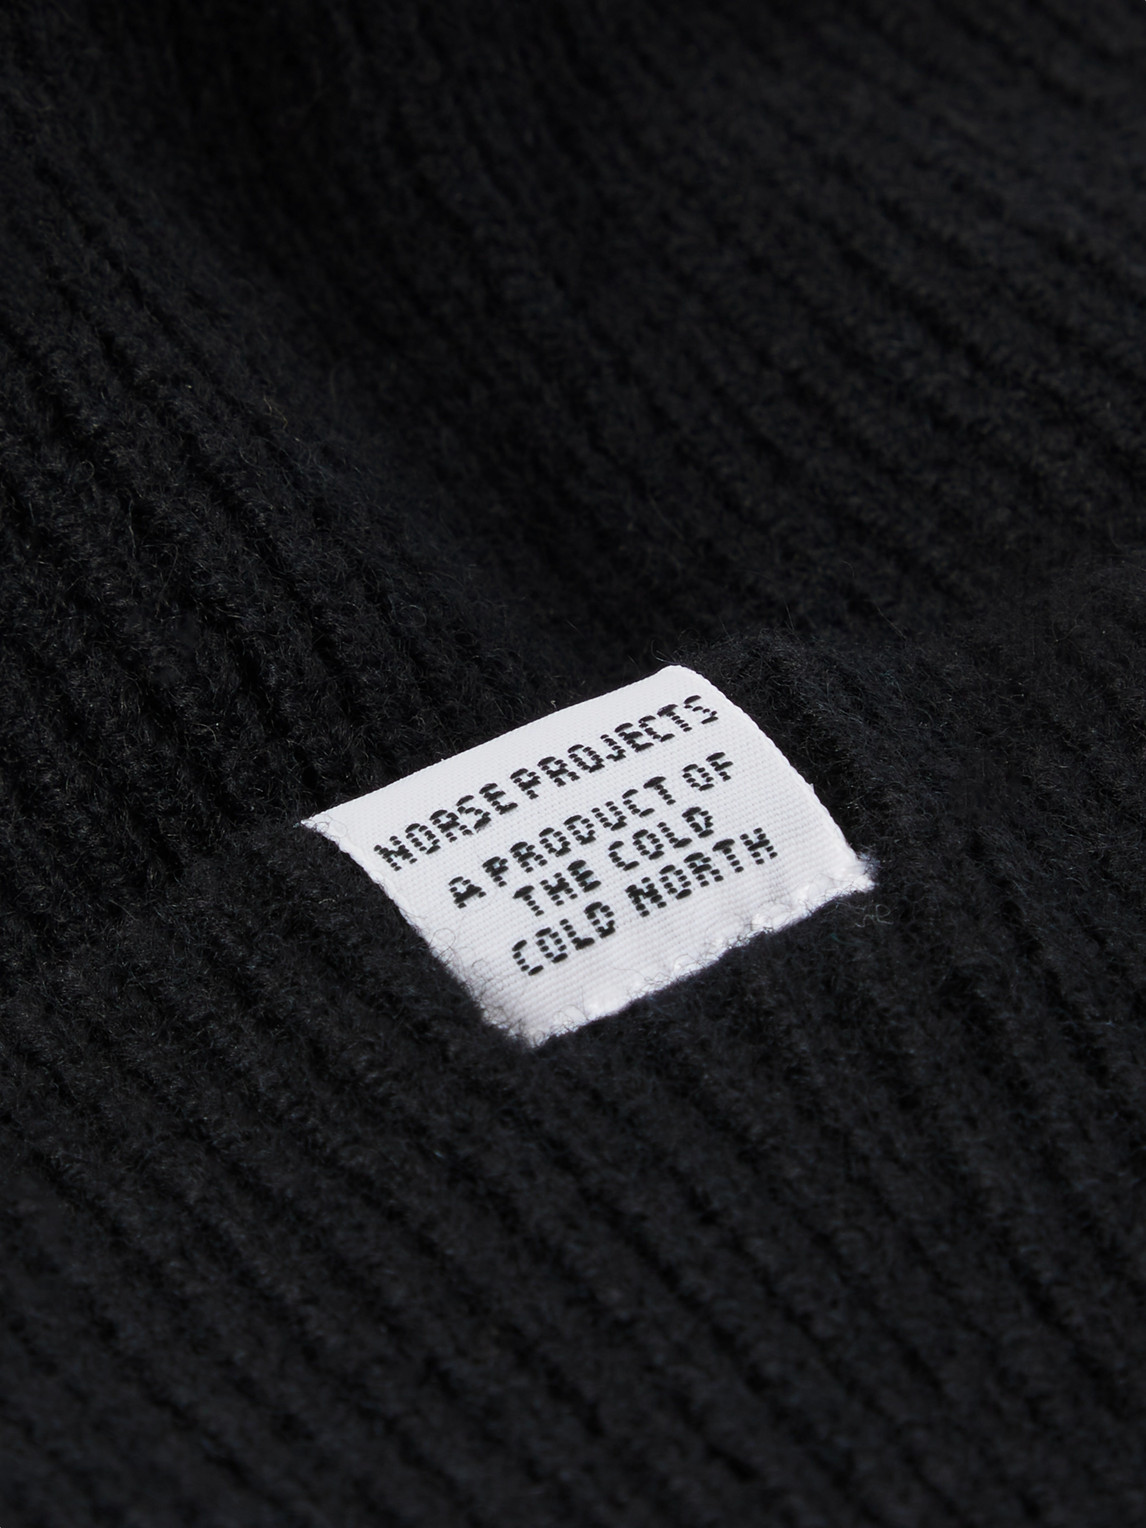 Shop Norse Projects Ribbed Wool Beanie In Black